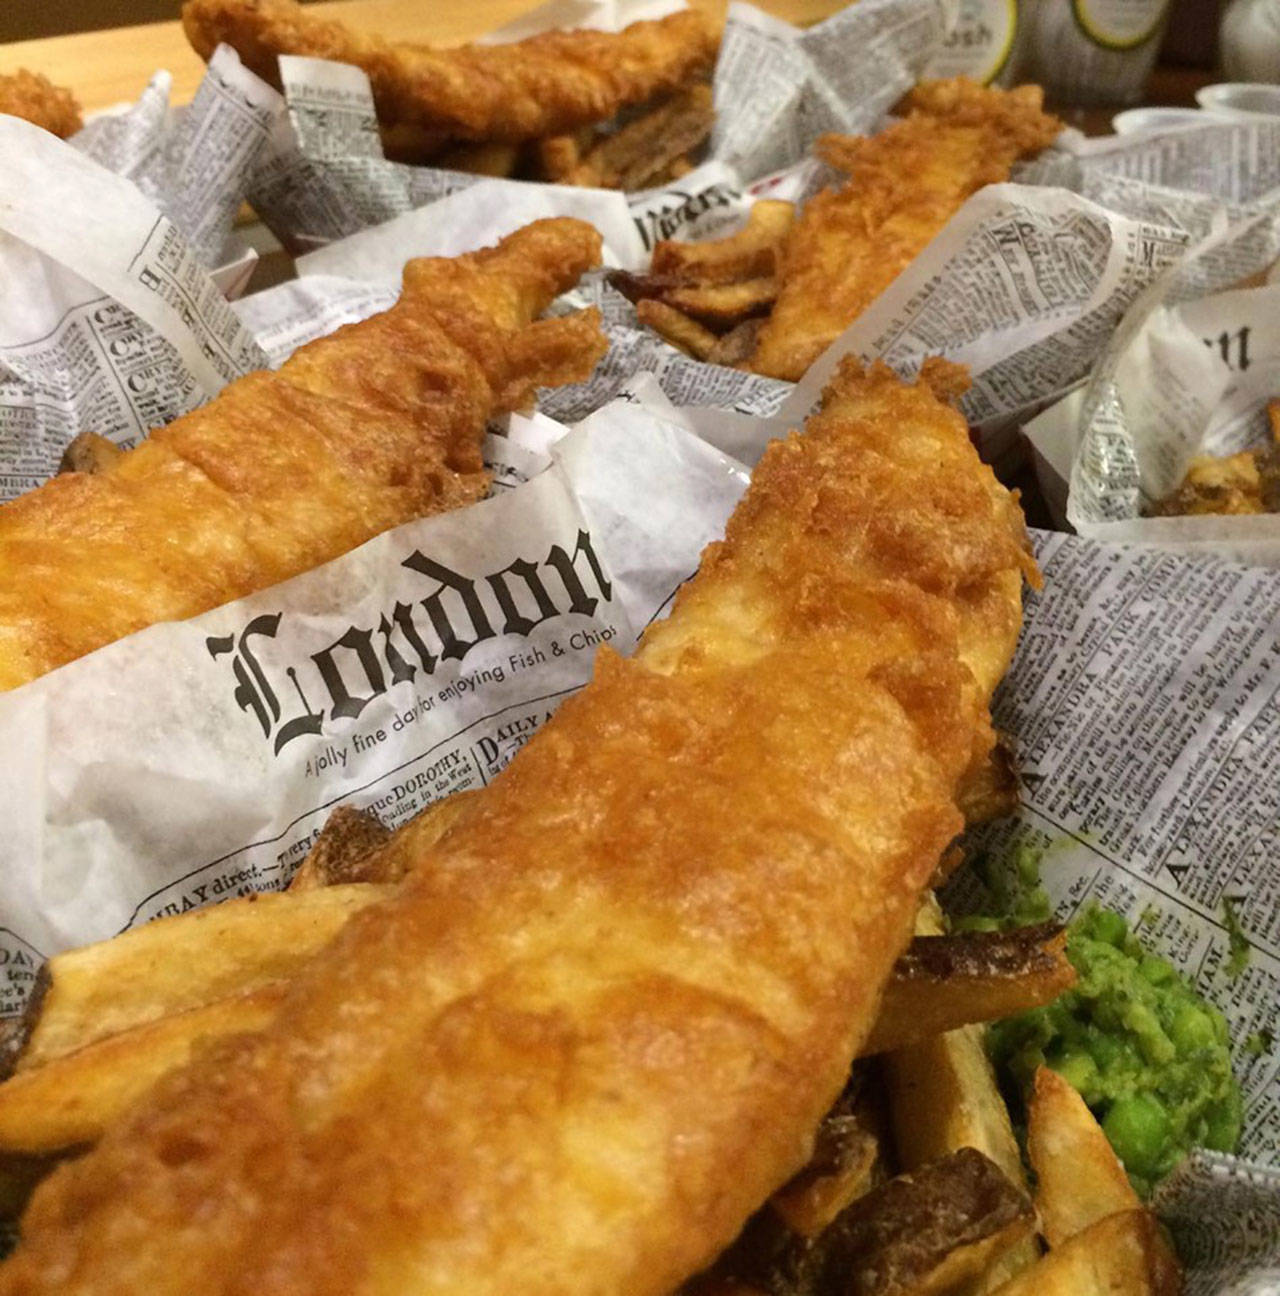 Photo courtesy of Proper Fish | The fish and chips at Proper Fish, named Seattle’s Best by the Seattle Times.